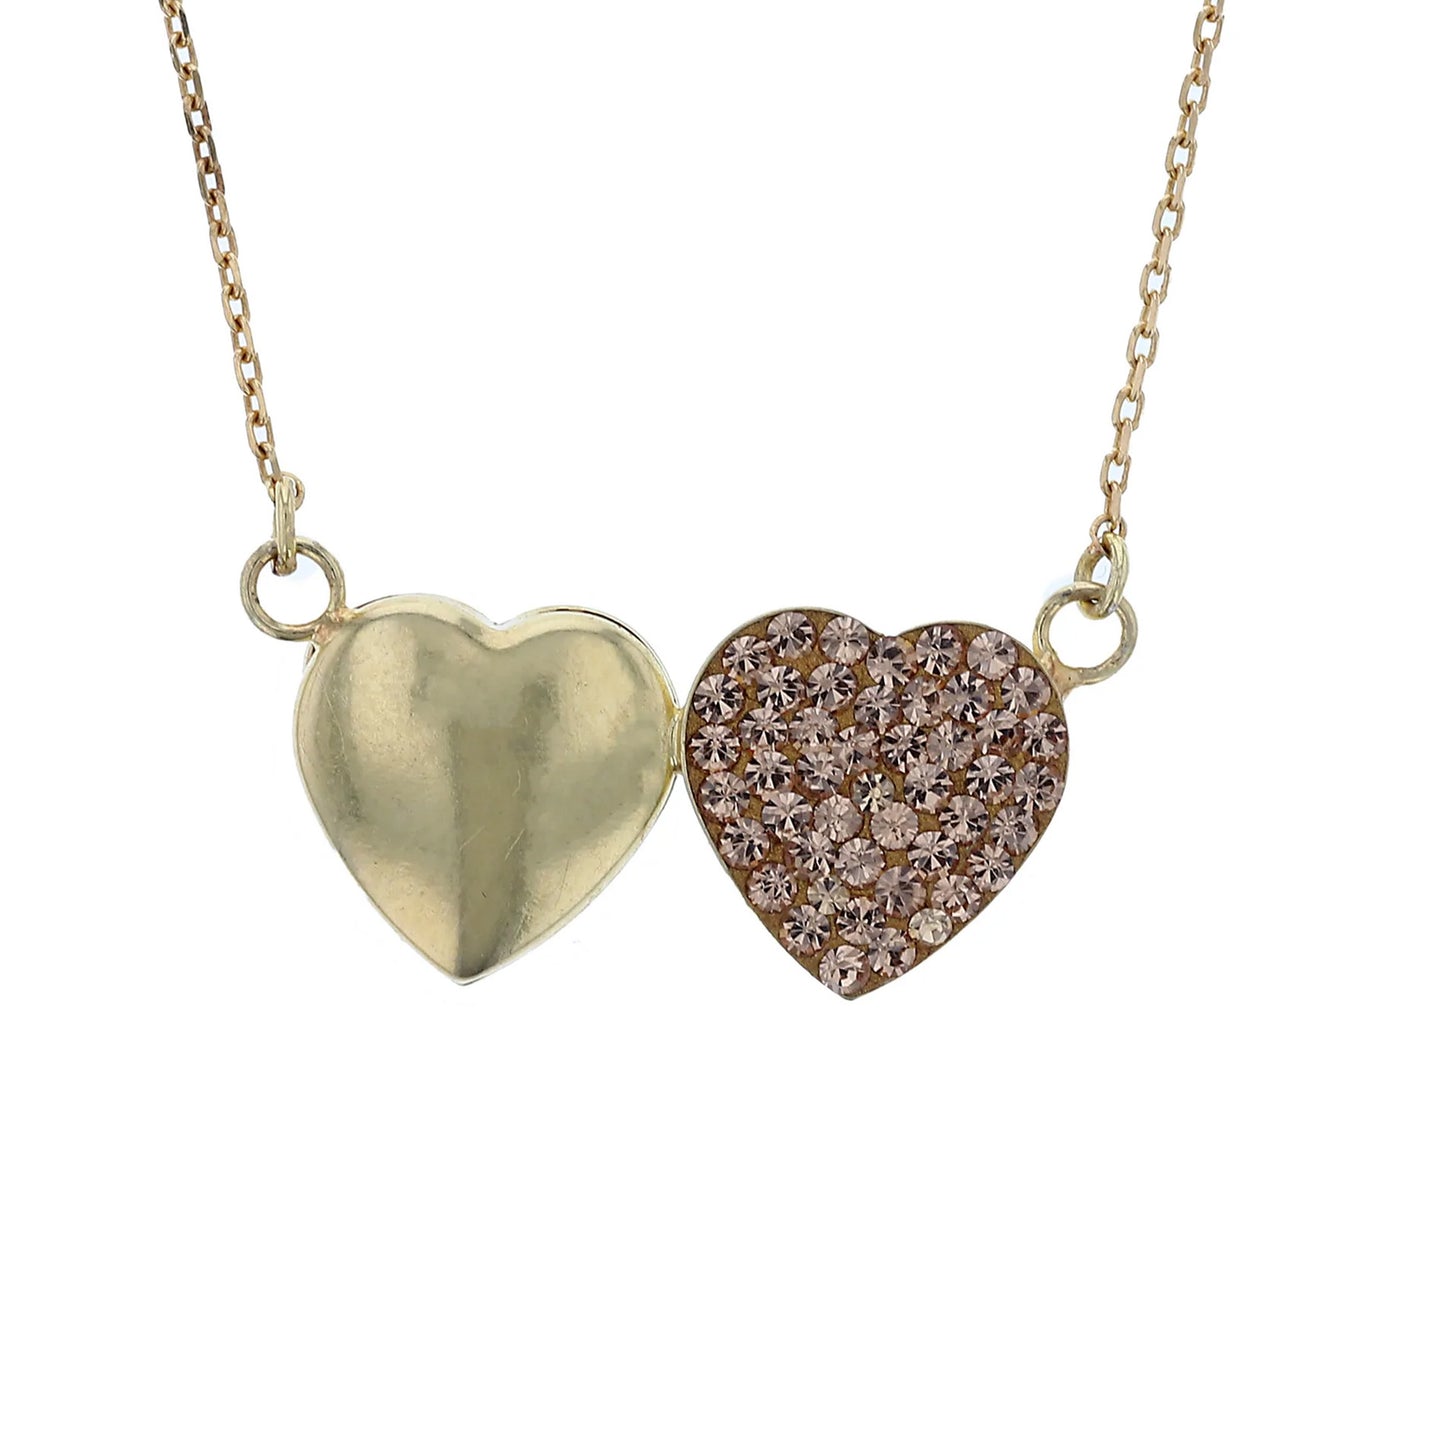 18K Gold Plated Sterling Silver Double Heart Horizontal Necklace with Light Colorado Topaz Crystals.